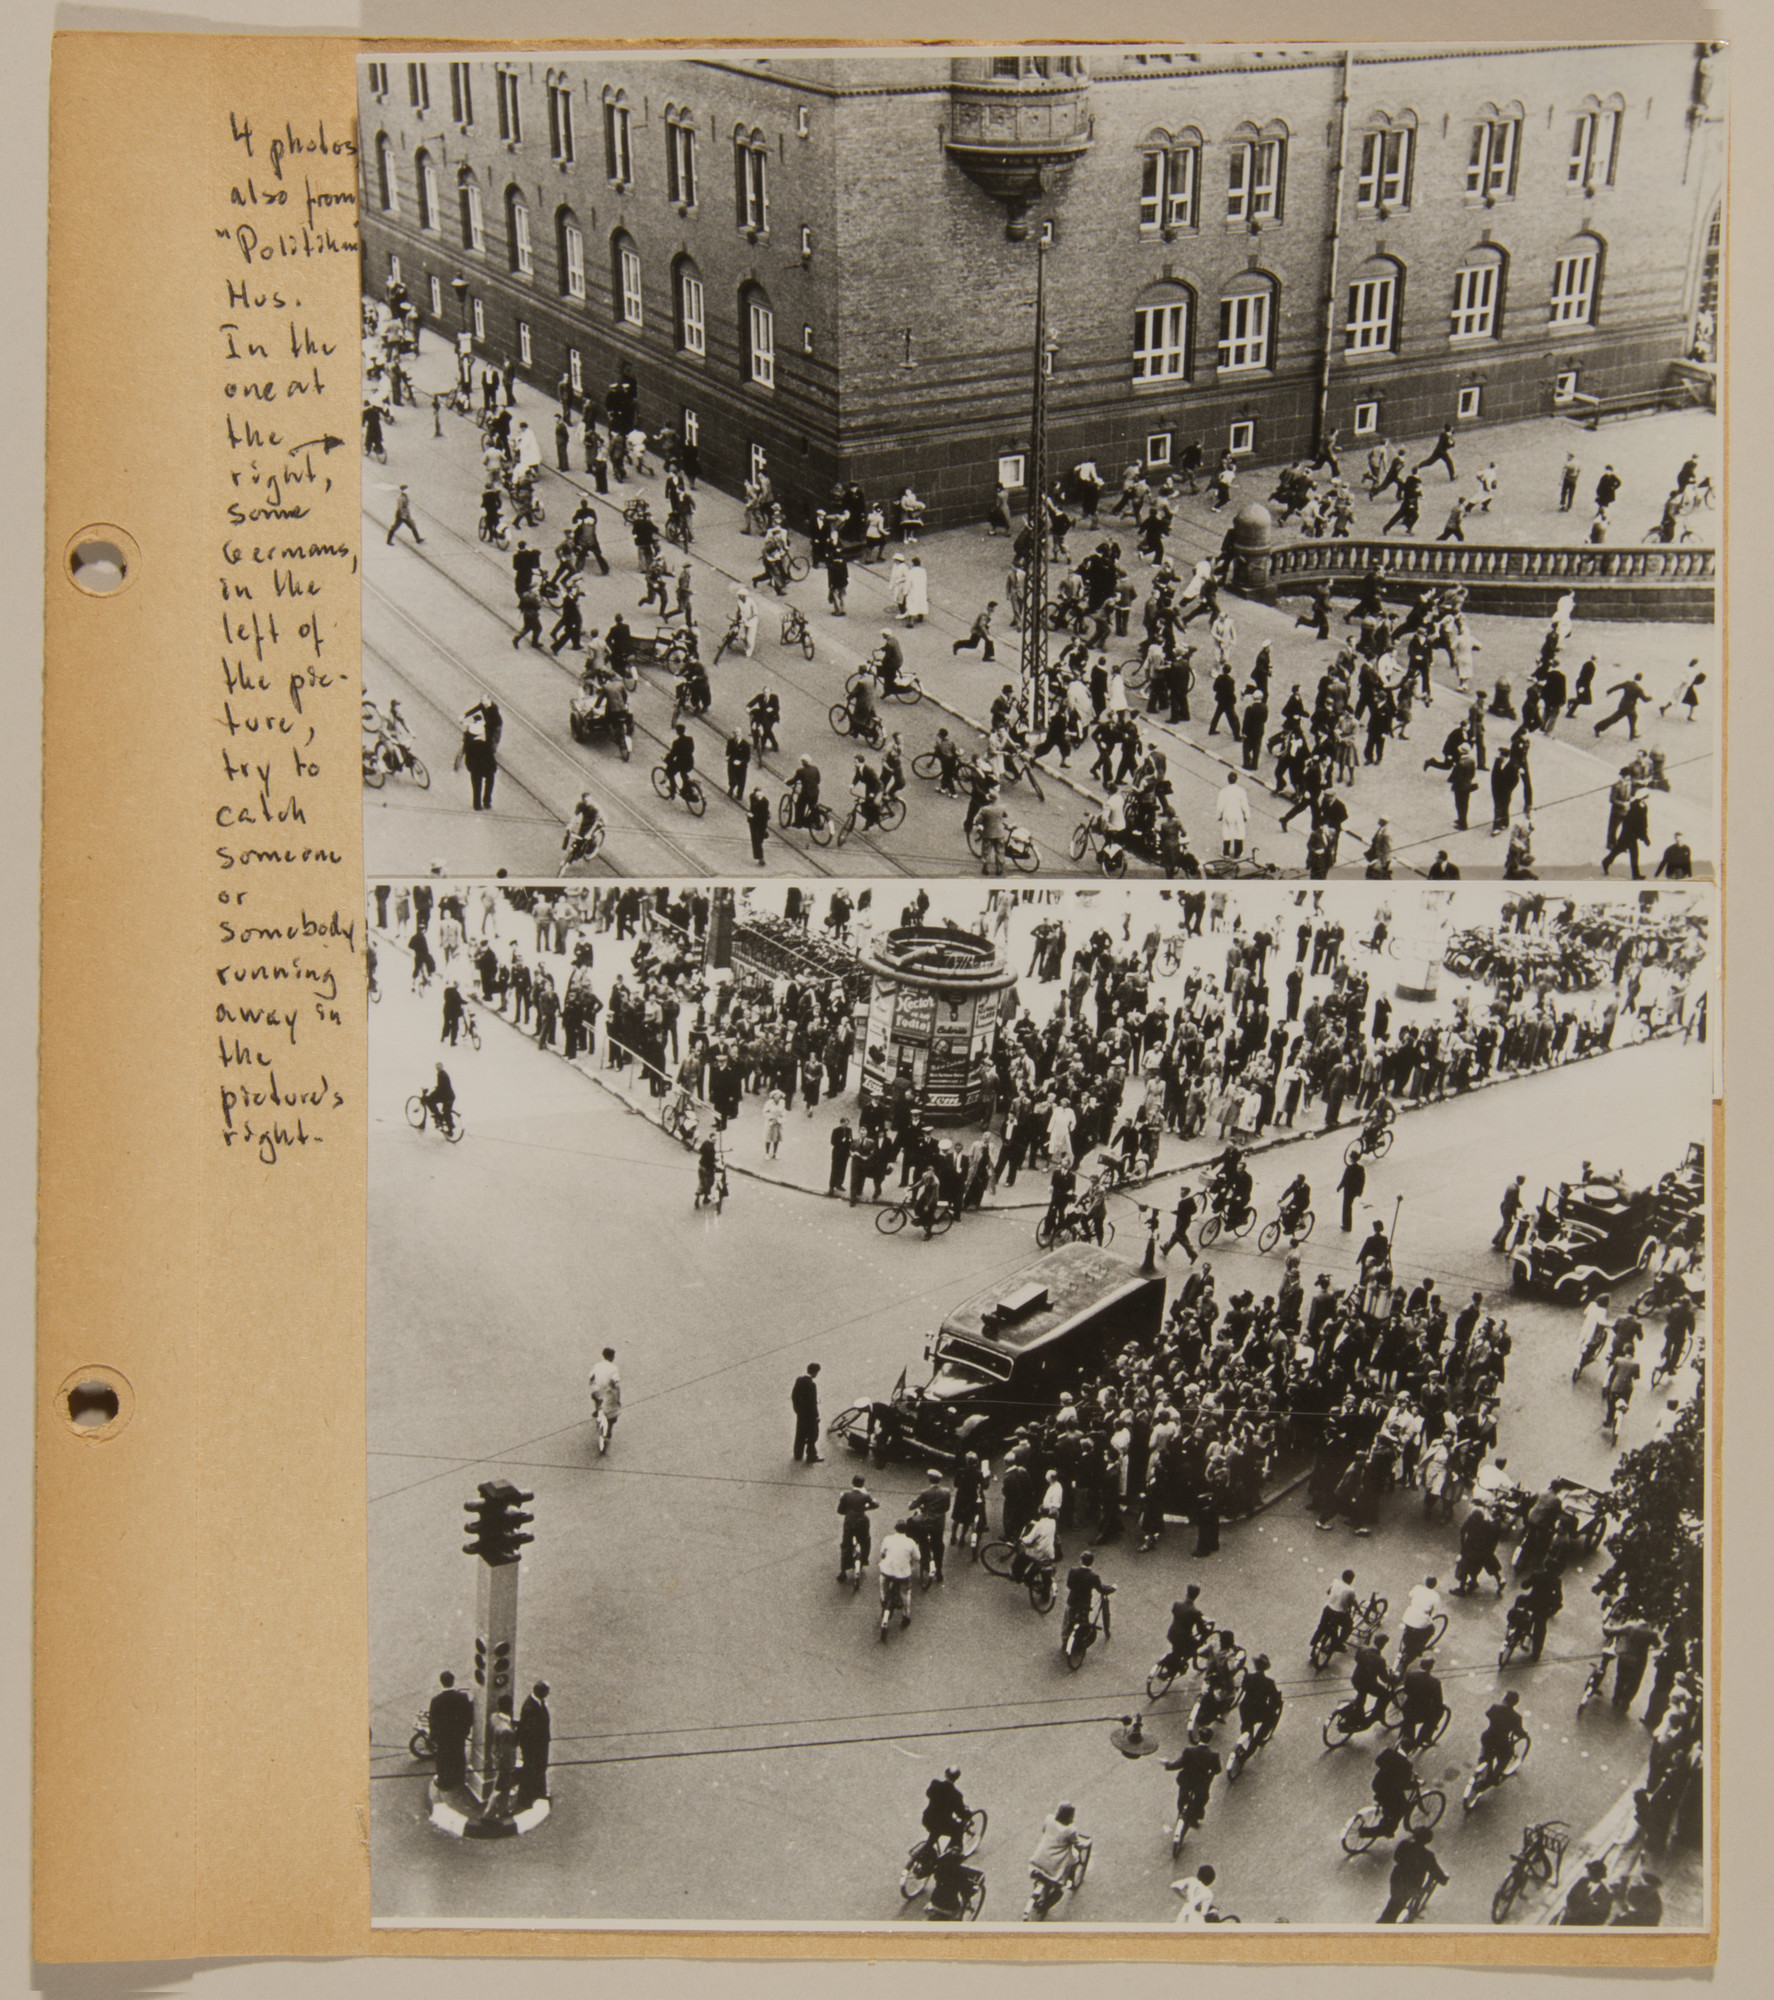 Page from volume four of a set of scrapbooks compiled by Bjorn Sibbern, a Danish policeman and resistance member, documenting the German occupation of Denmark.

The page contains photographs from a series showing German and Danish SS raids on civilians.